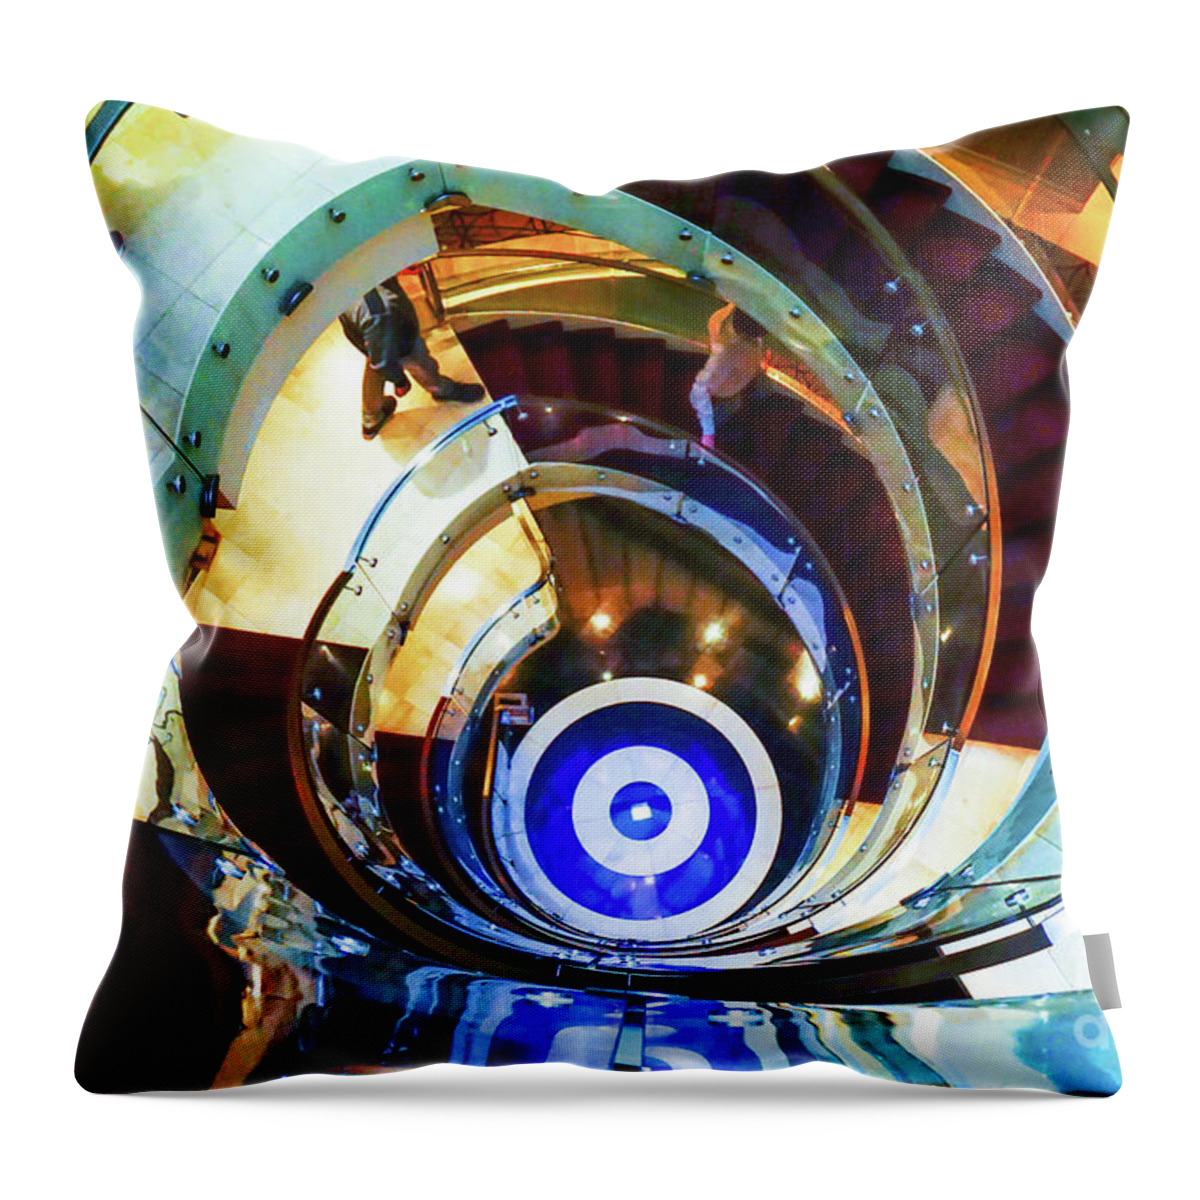  Throw Pillow featuring the photograph Stairway To Steerage by Darcy Dietrich